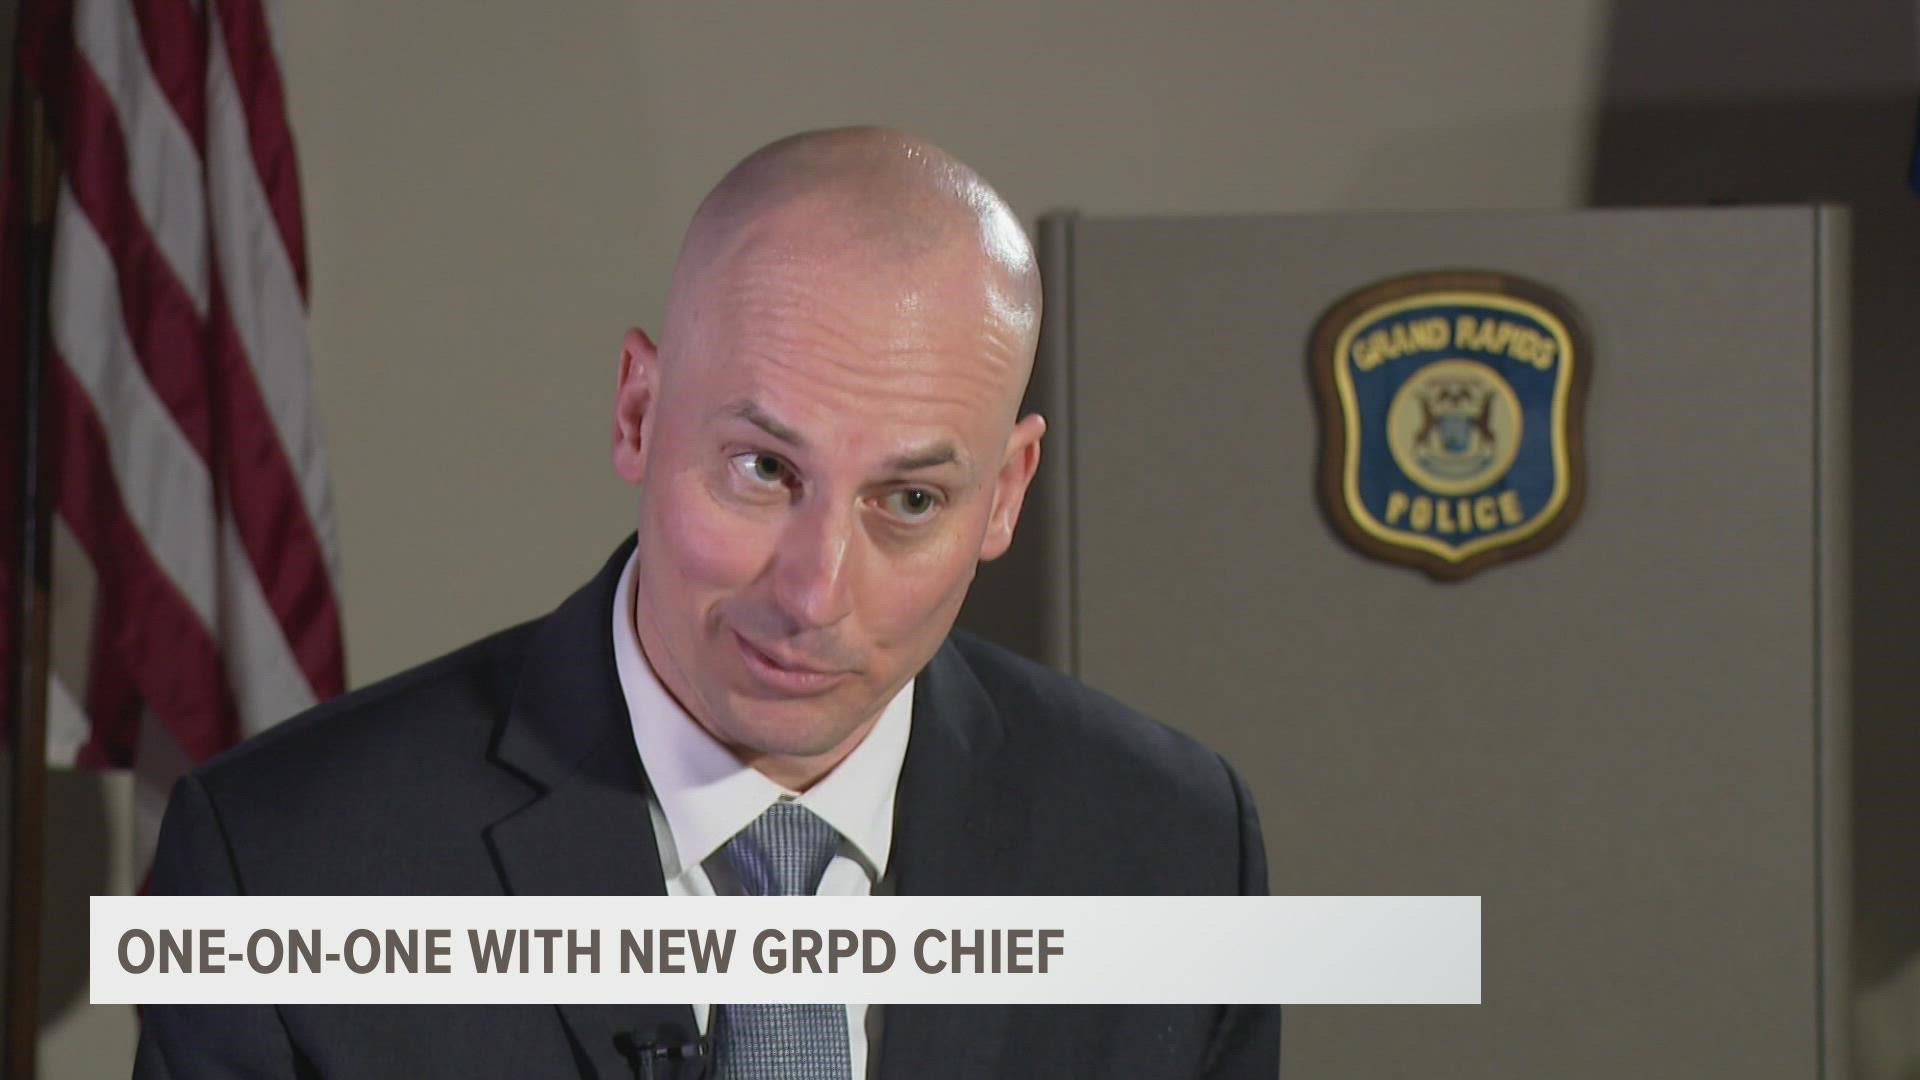 It has been four days since Grand Rapids' new police chief was sworn in.